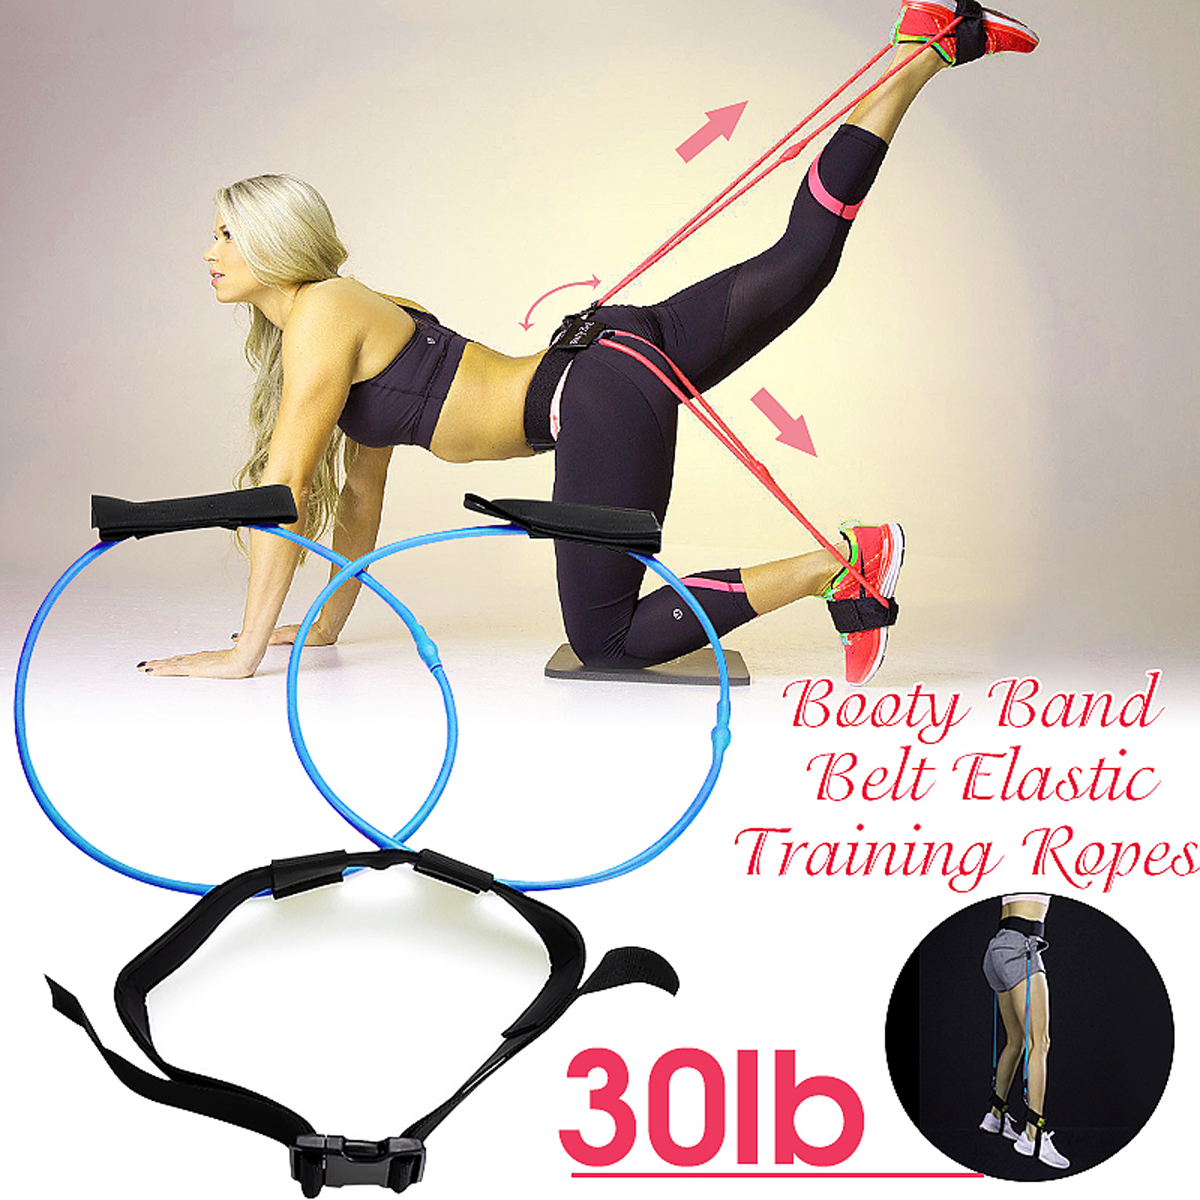 30LB-Booty-Resistance-Bands-Belt-Gym-Exercise-Training-Yoga-Butt-Lift-Fitness-Health-Workout-Band-1372253-1